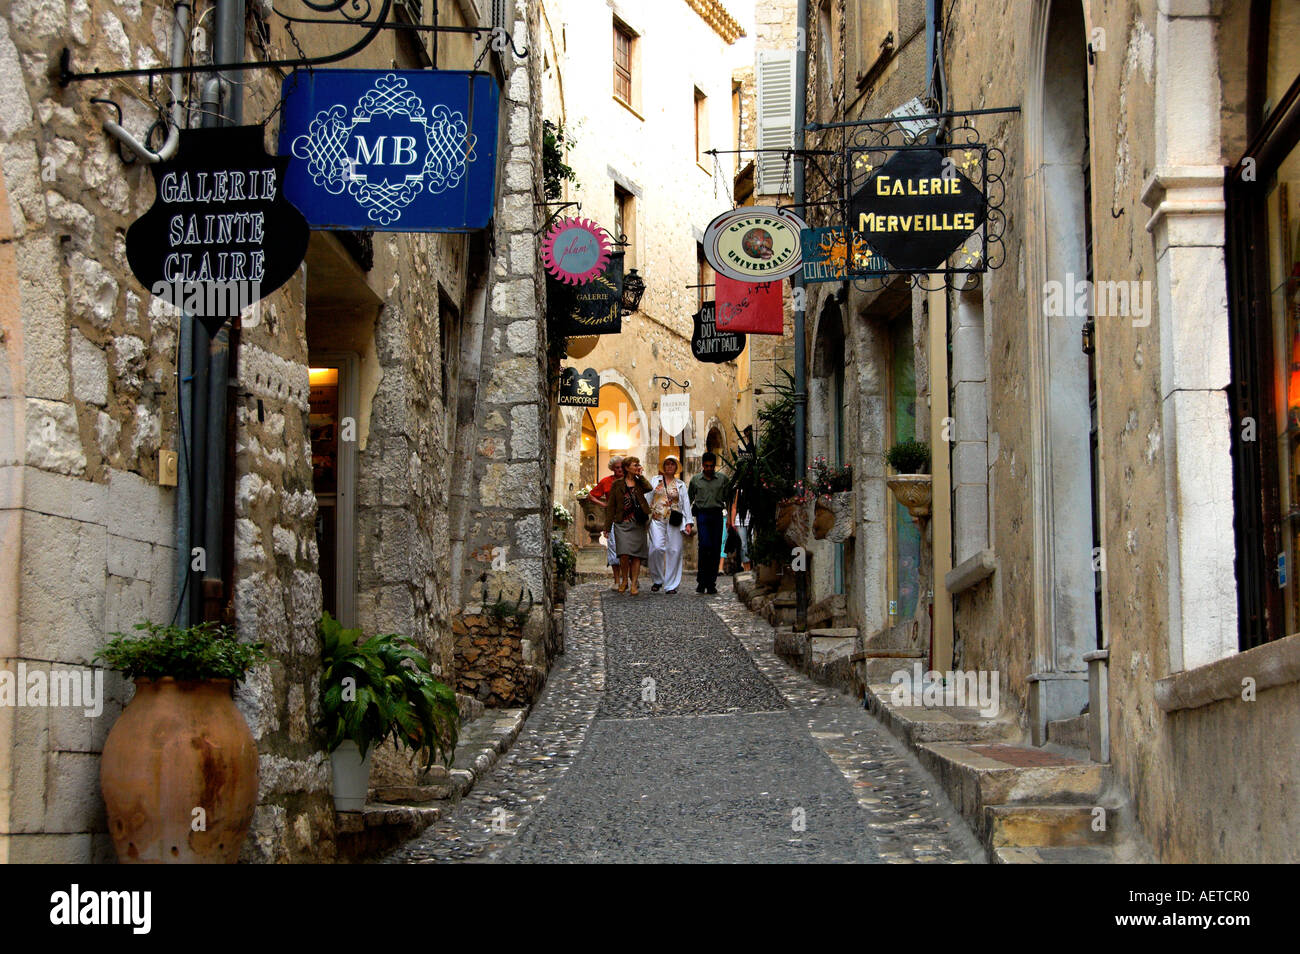 Cookies & Candies: Sightseeing and street style in St Paul de Vence